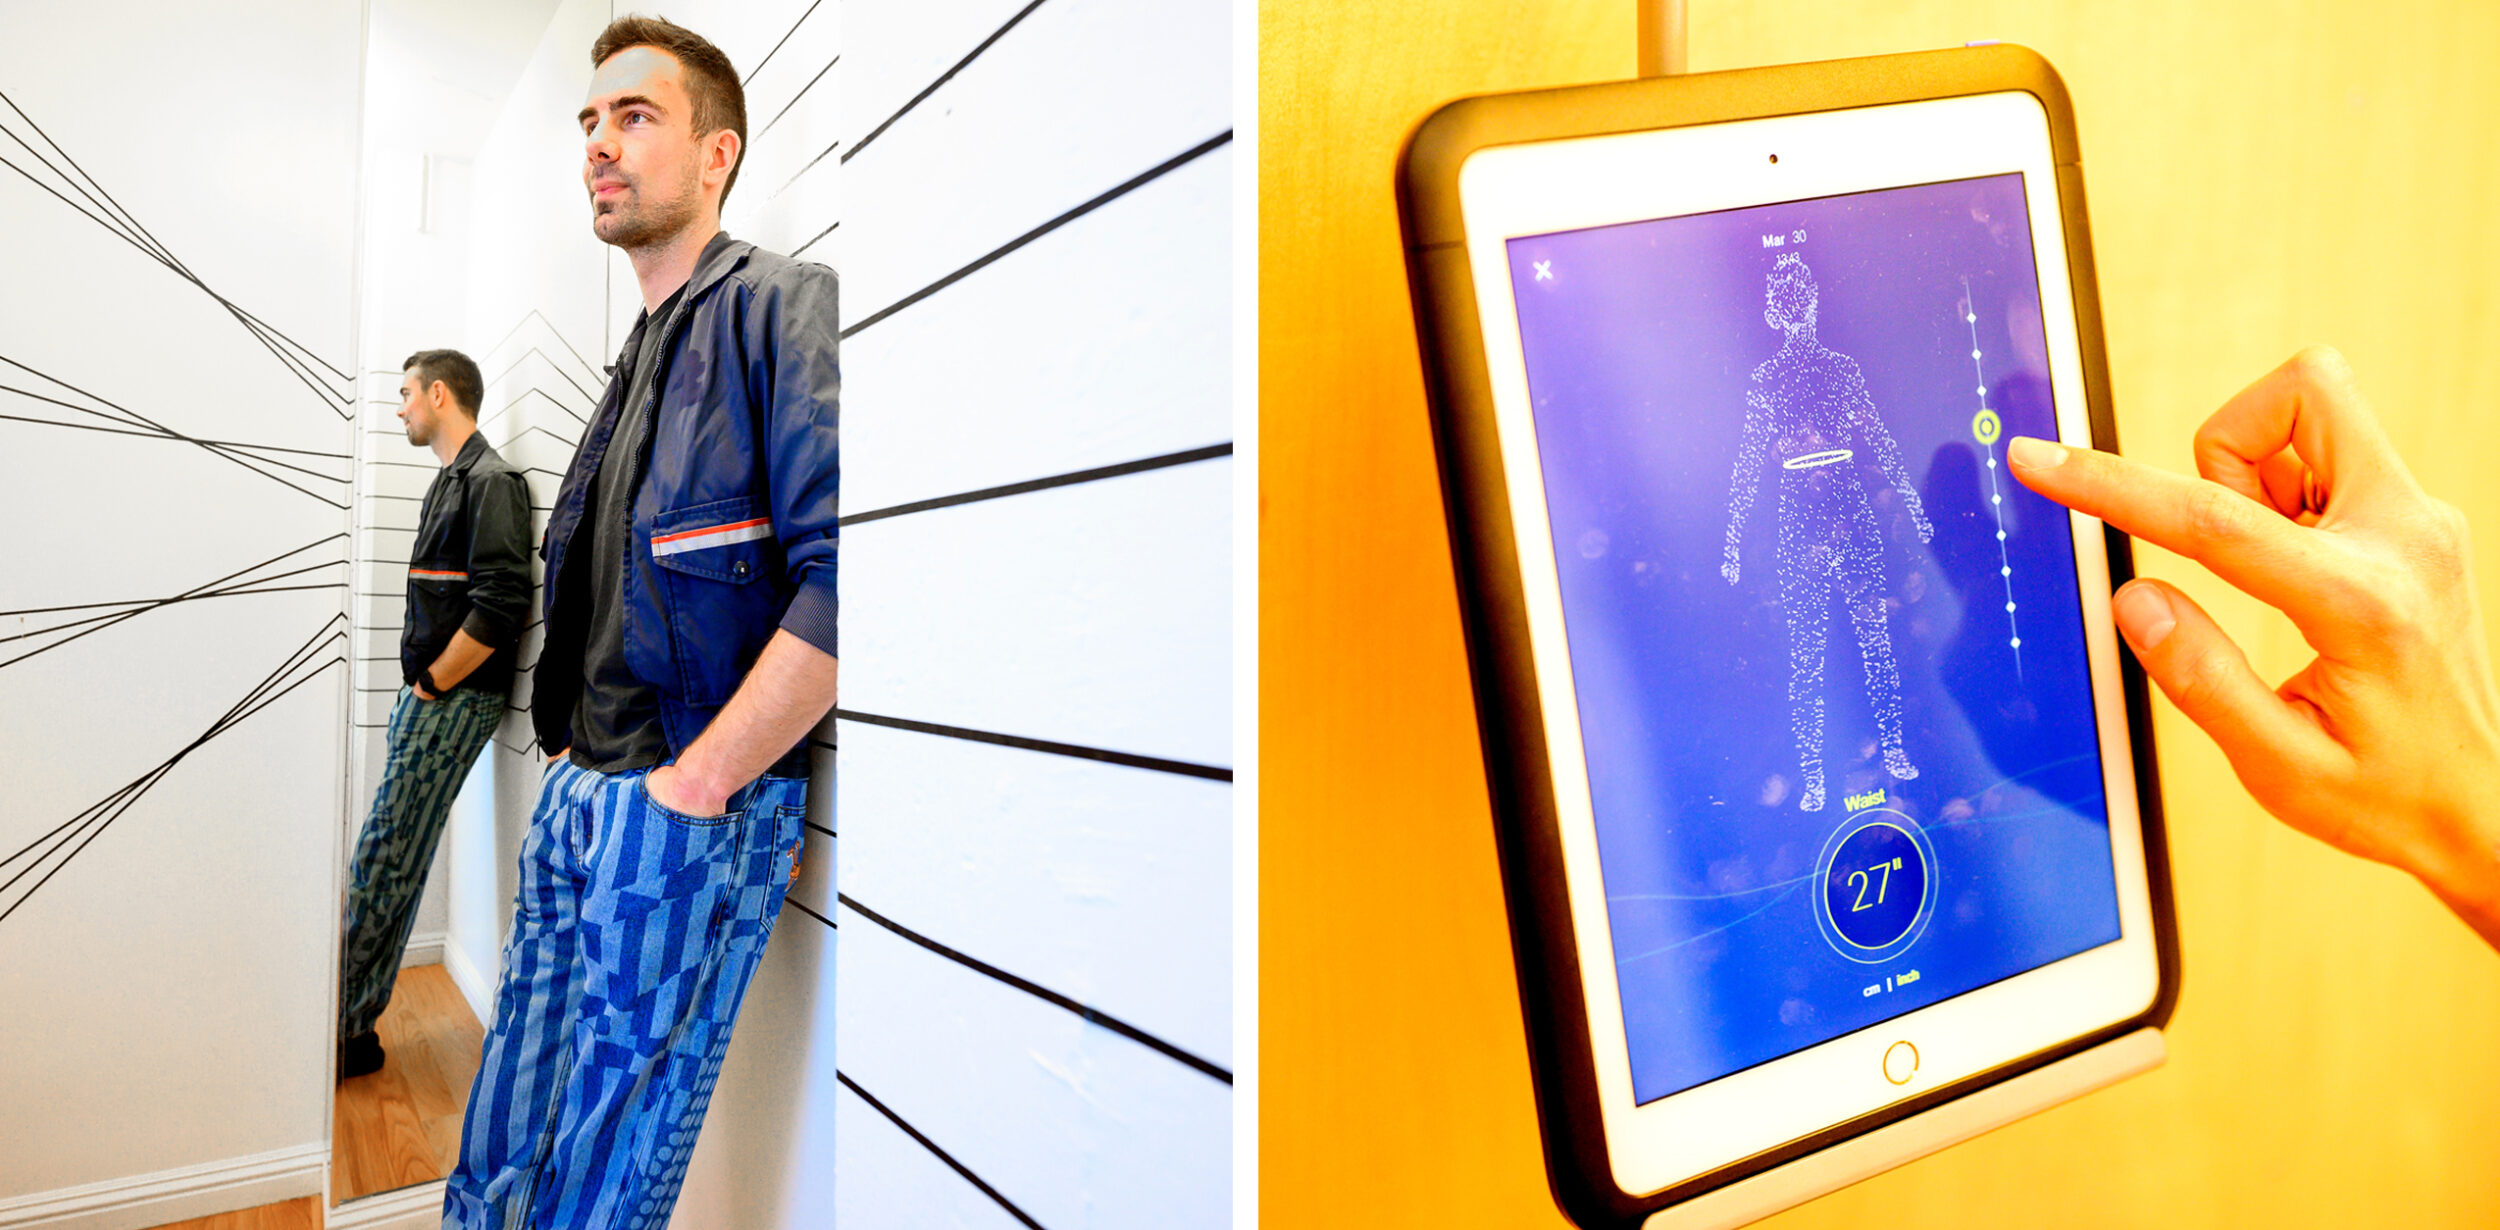 A man stands in a corner with lines on walls, and a finger points at a digital body scan on a tablet. 